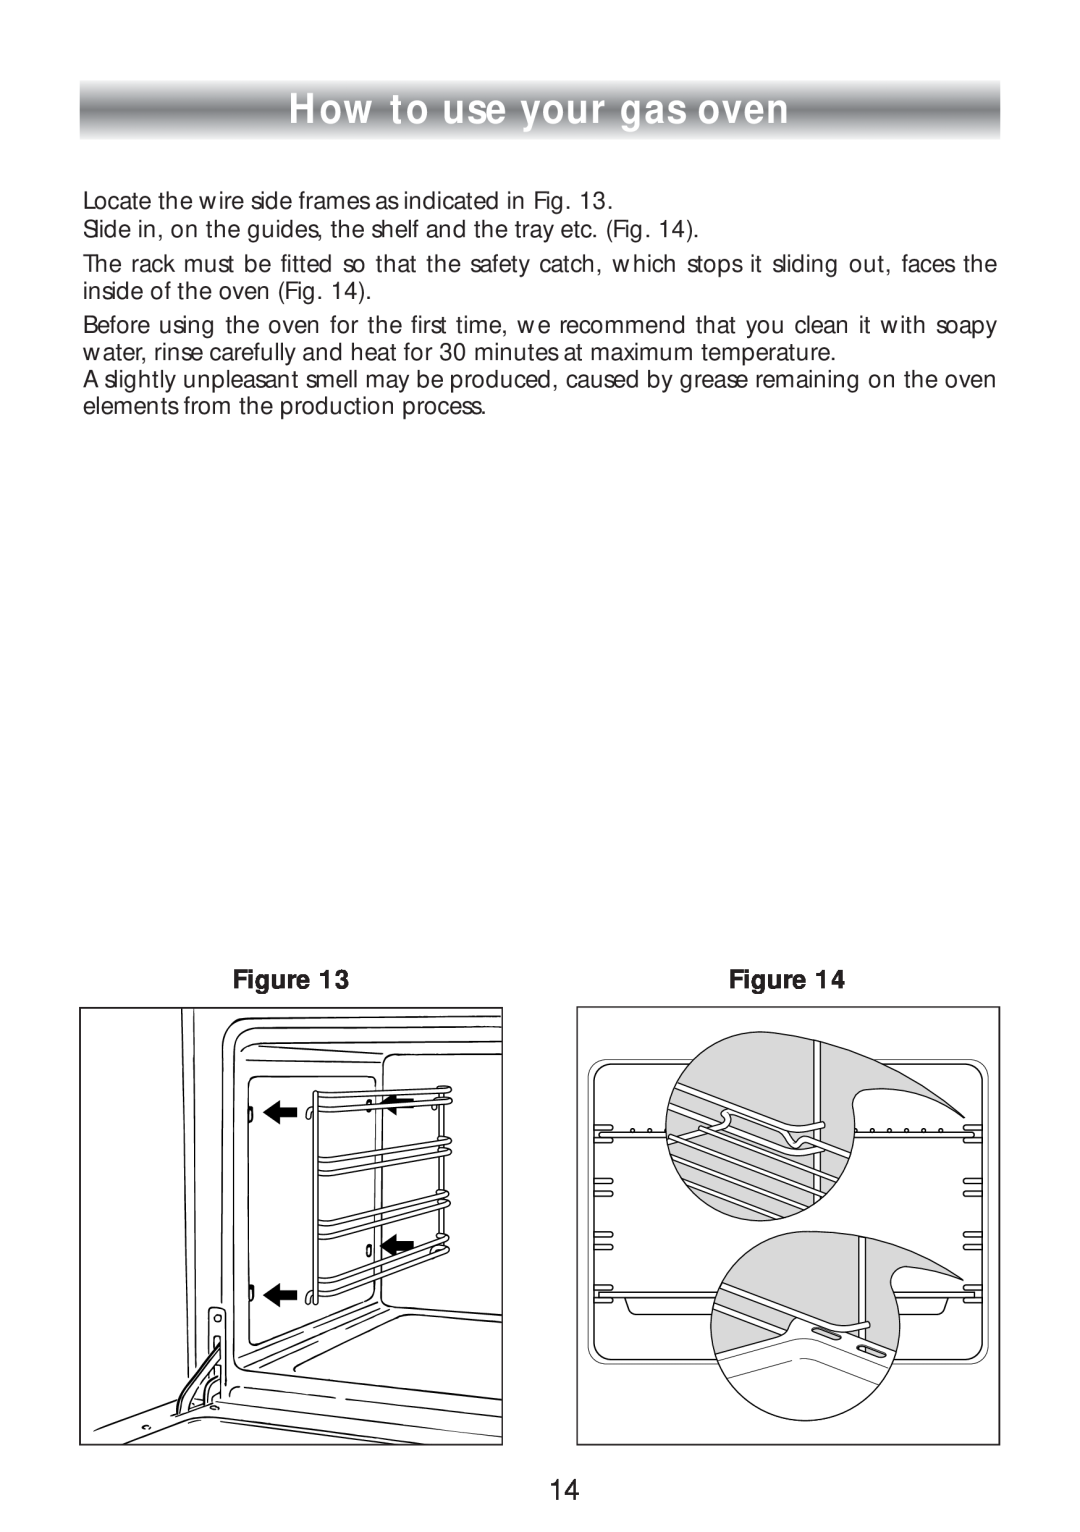 CDA SC309 manual How to use your gas oven 